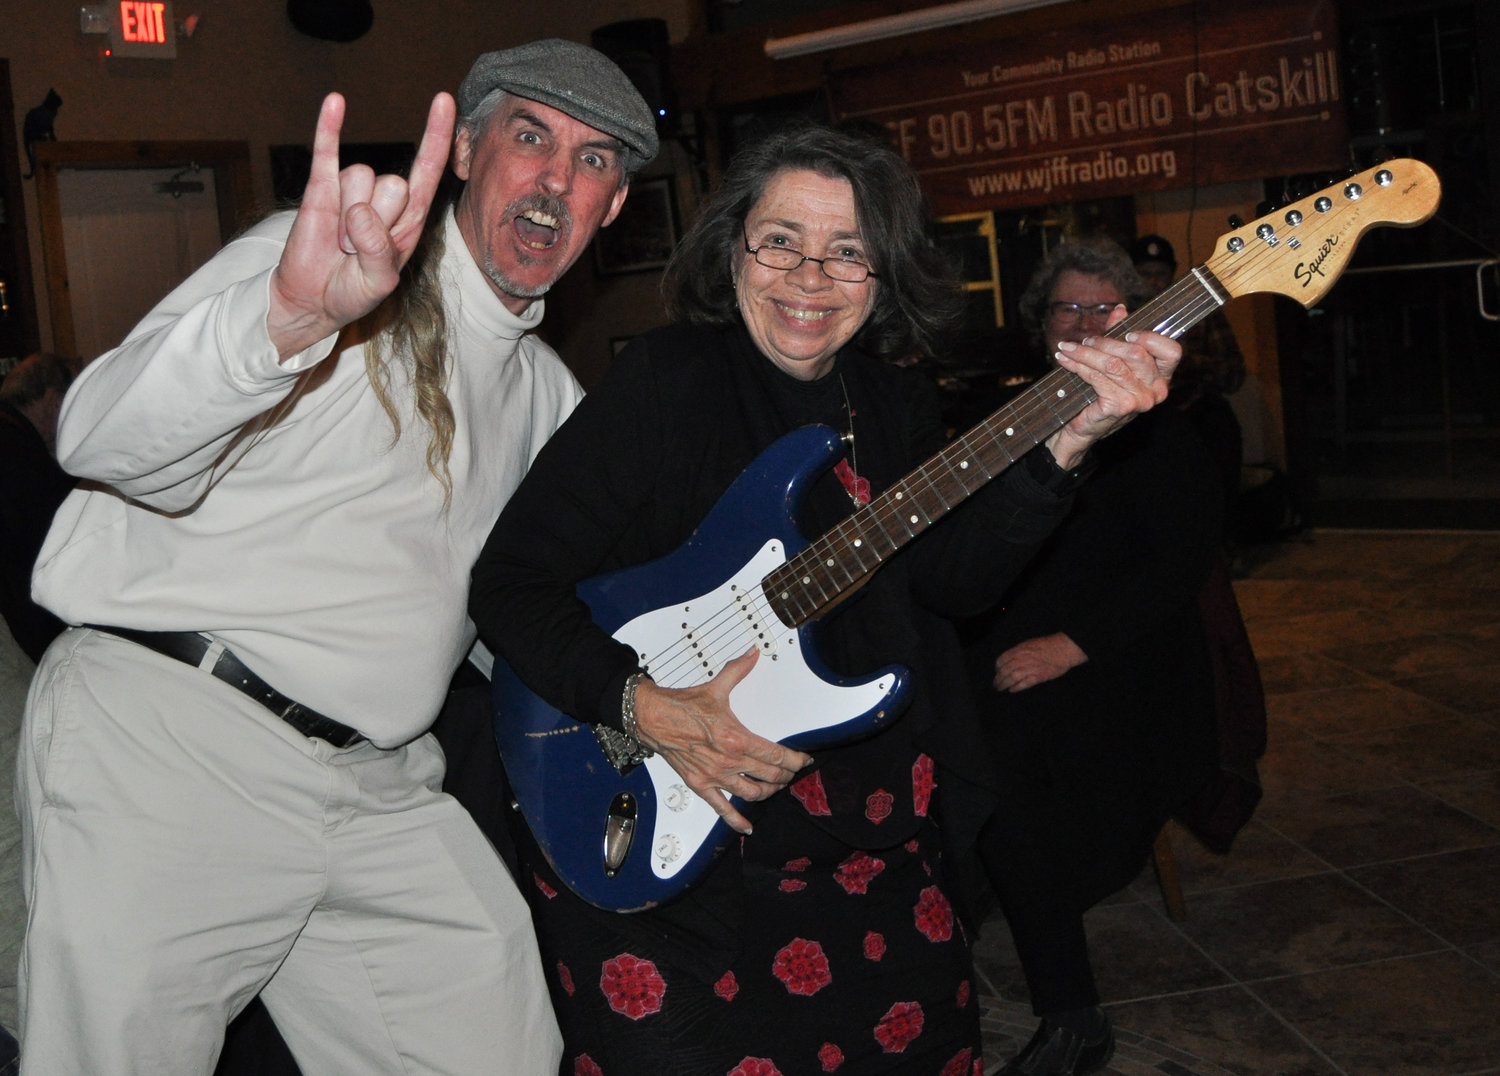 WJFF Radio General Manager Dan Rigney presented door prize winner Theresa Maelia with a restored Fender Squire contributed by Glenn Lazarro’s Guitars4Good, which repairs and donates the instruments to disadvantaged adults, kids and charitable organizations.